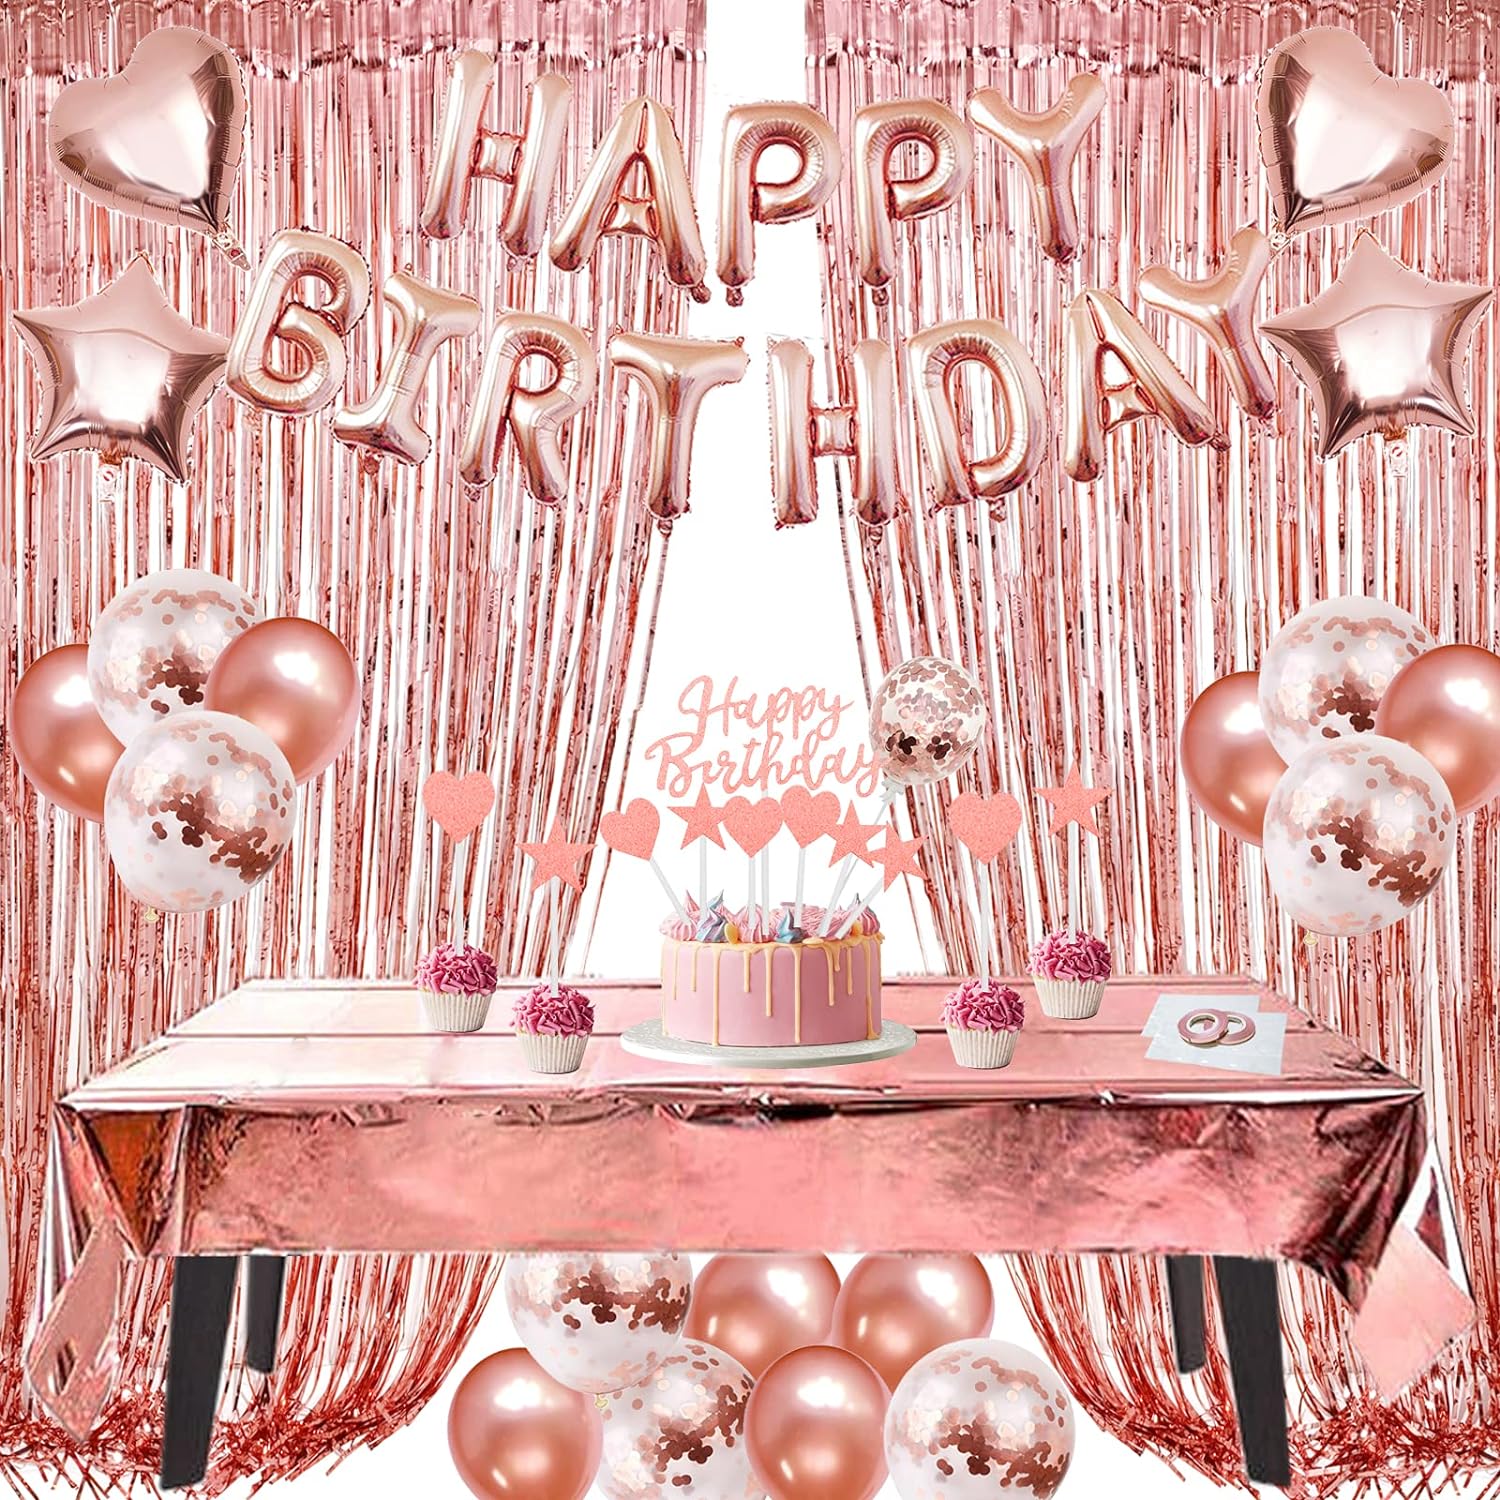 ZERODECO Birthday Decorations Rose Gold, Foil Happy Birthday Balloon Banner Tablecloth Fringe Shiny Curtains Cake Flag Star and Heart Balloons Confetti Latex Balloons for Birthday Party